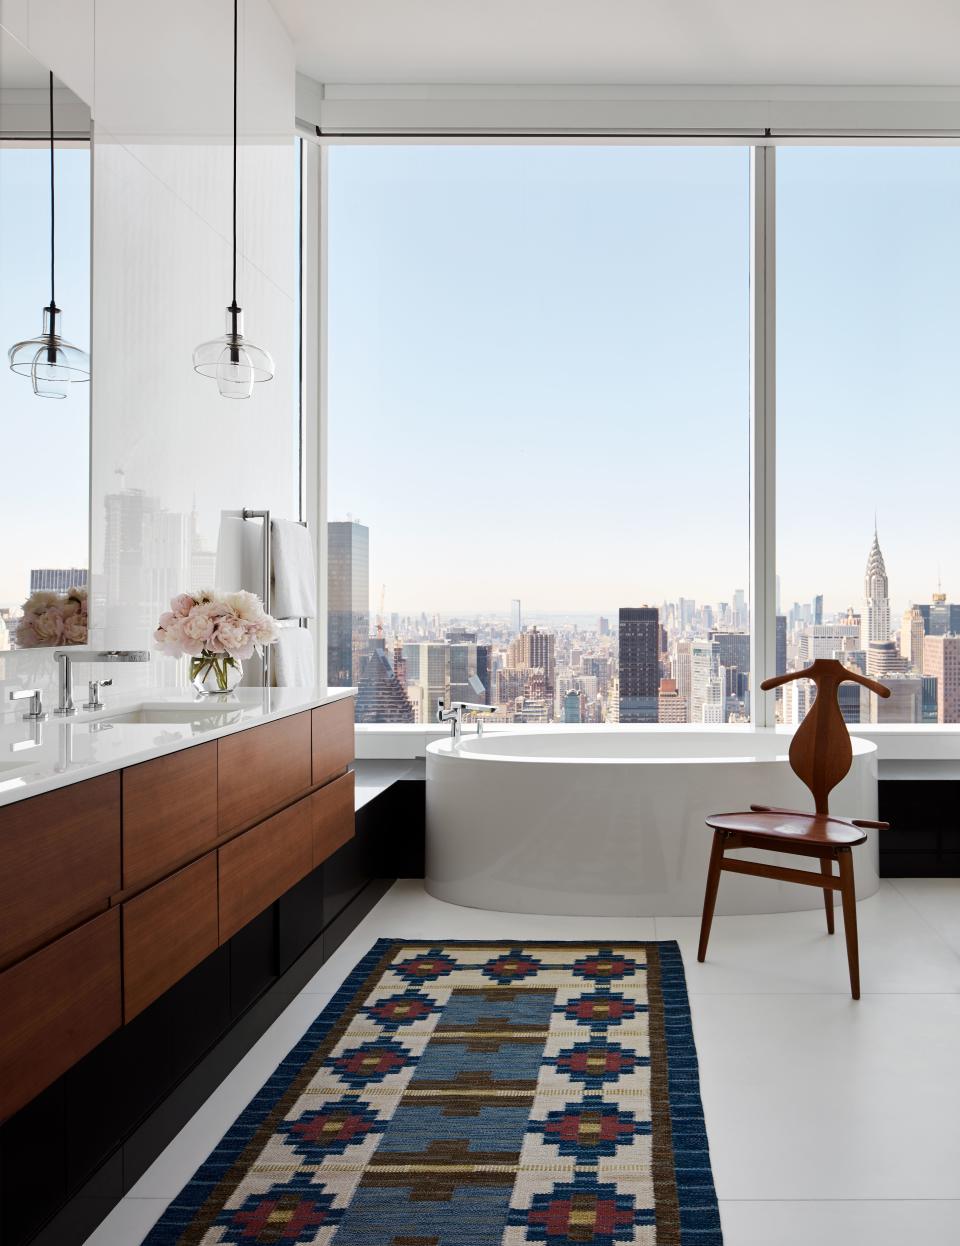 The serenity of the master suite carries over to the stunning bathroom, boasting a sculptural tub designed by Daniel Romualdez that offers bathers a bird’s-eye view of Midtown Manhattan. Polished white nanoglass tiles the walls and floors, warmed by a vintage Swedish flat weave rug. Wooden accents come from the vanity and a vintage carved teak valet chair by Hans Wegner. The pendant lights are by Alison Berger.